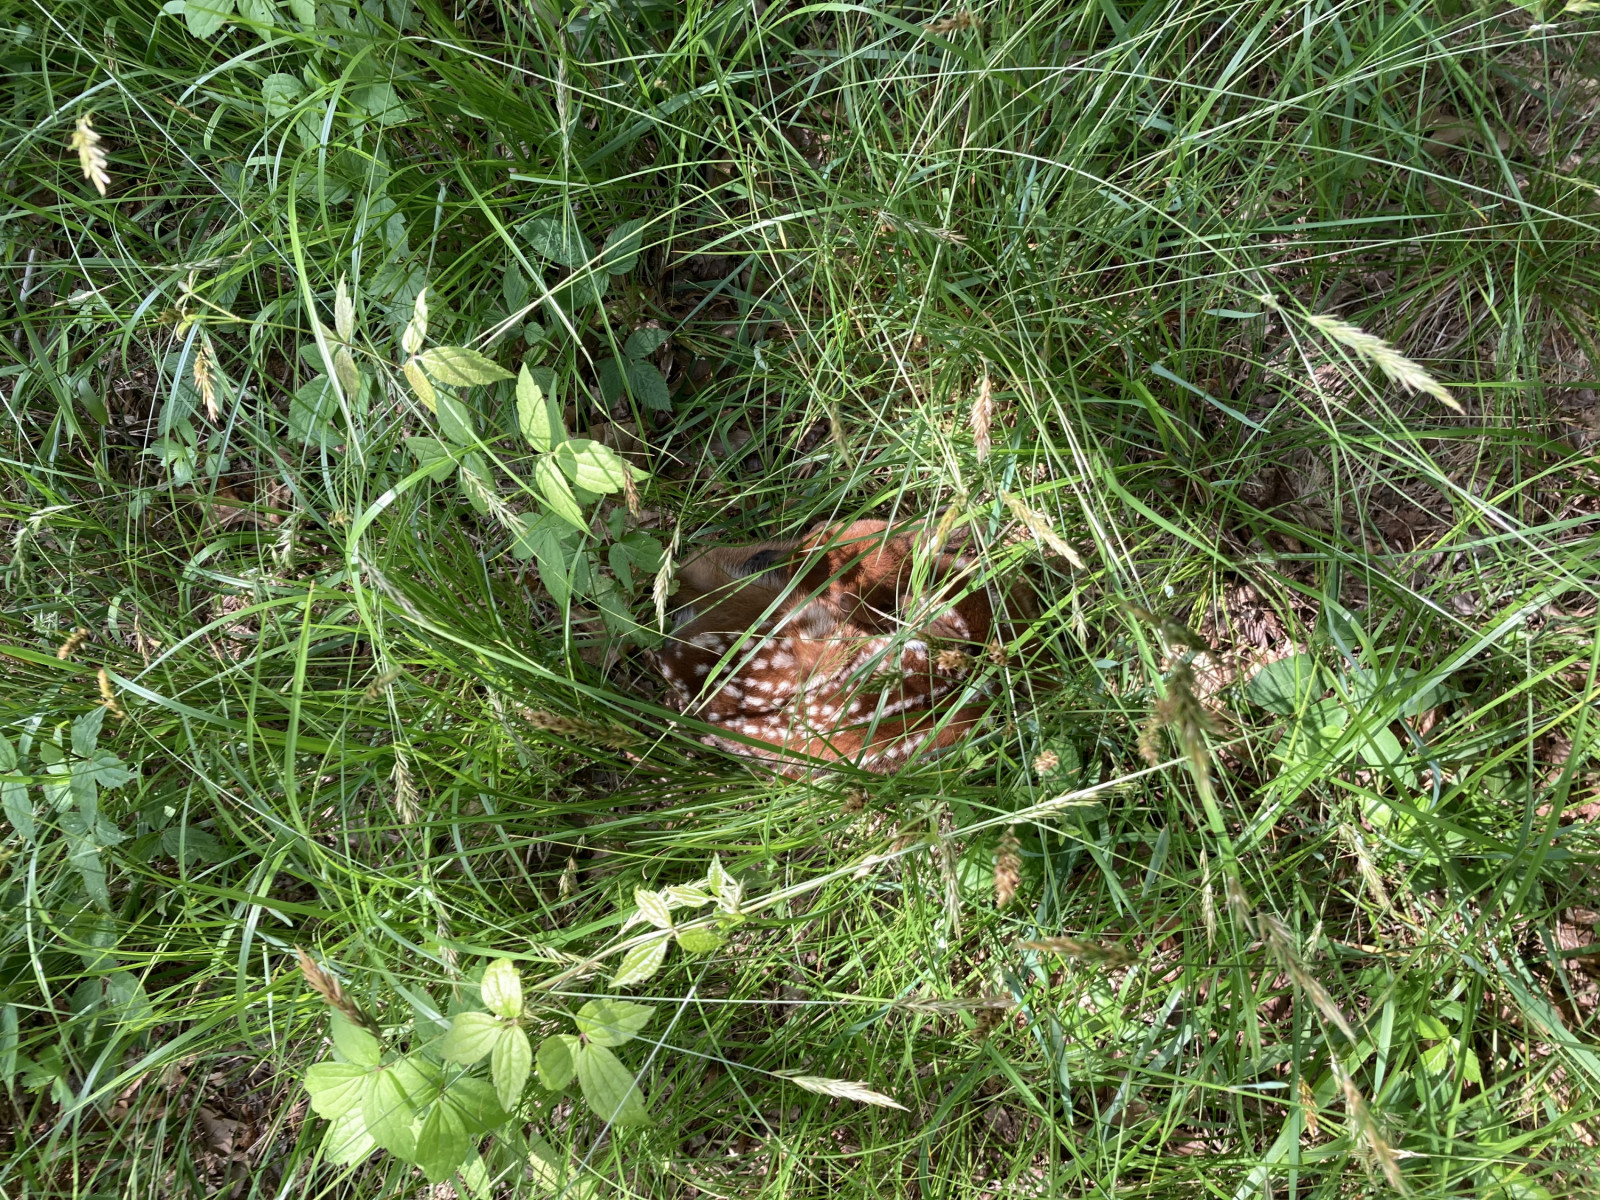 A baby deer lies, curled up in tall grass.